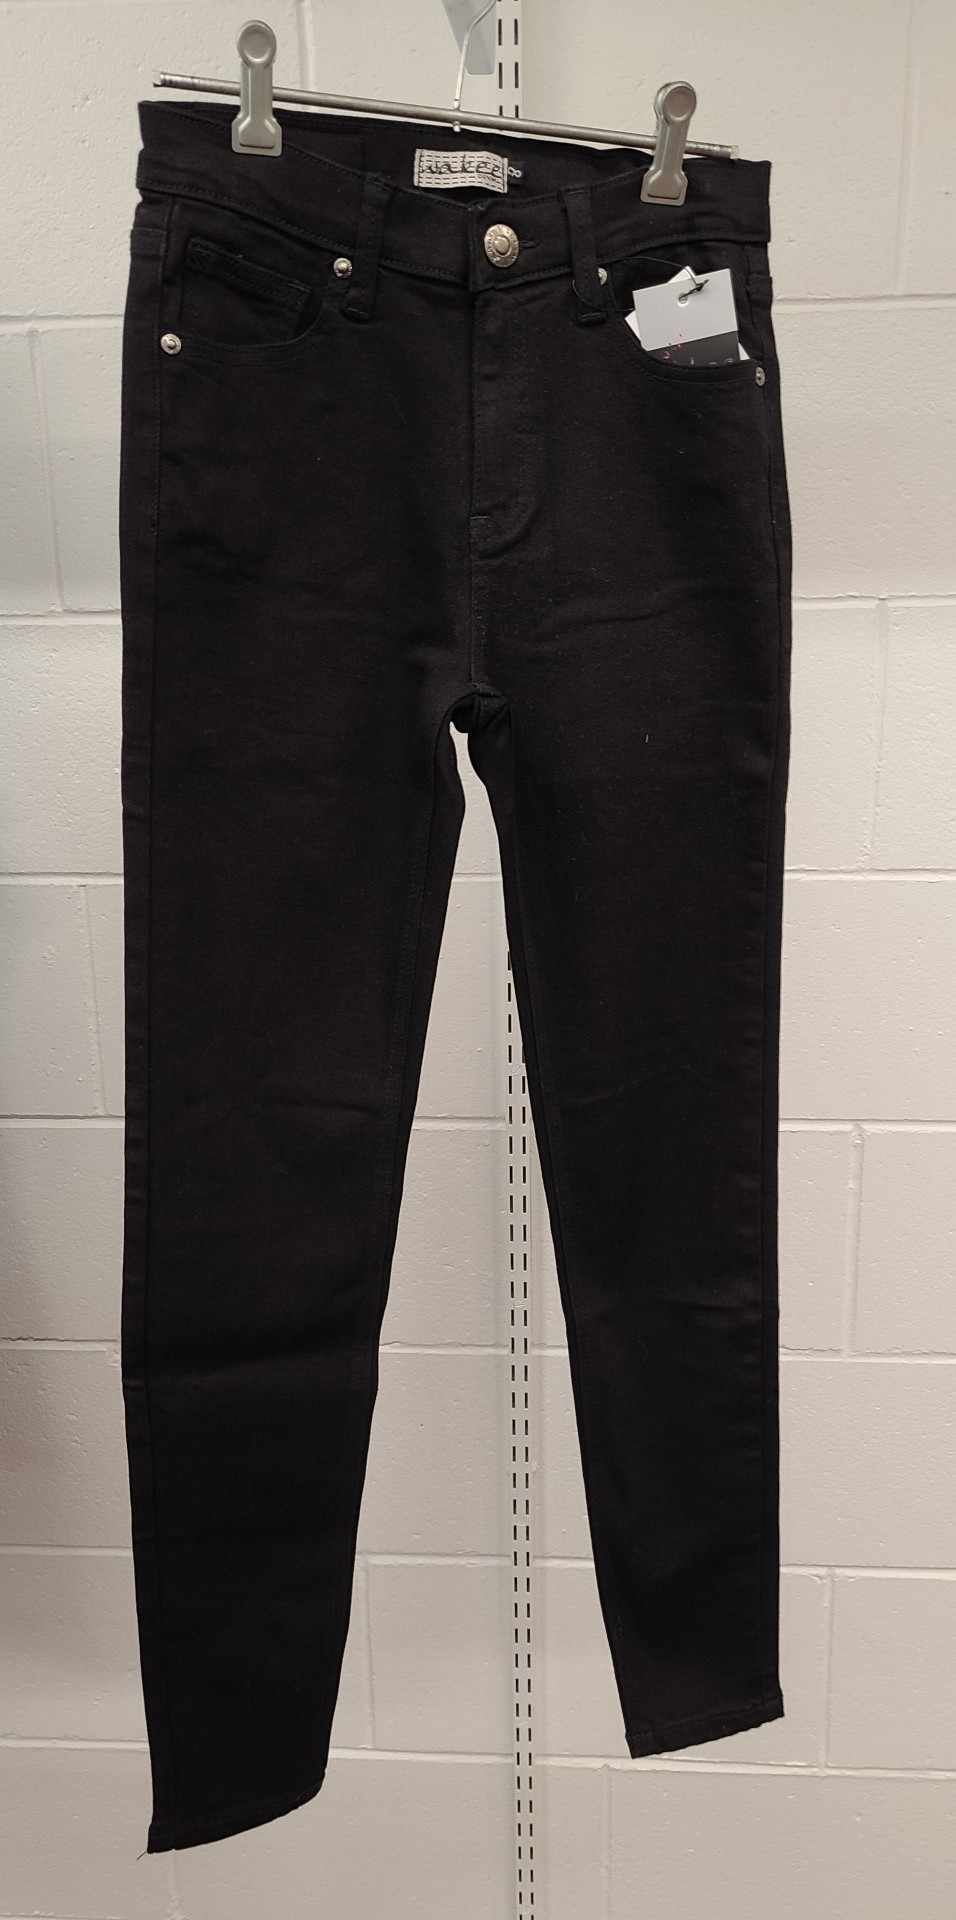 Wakee Jeans - Thick Black Jeans